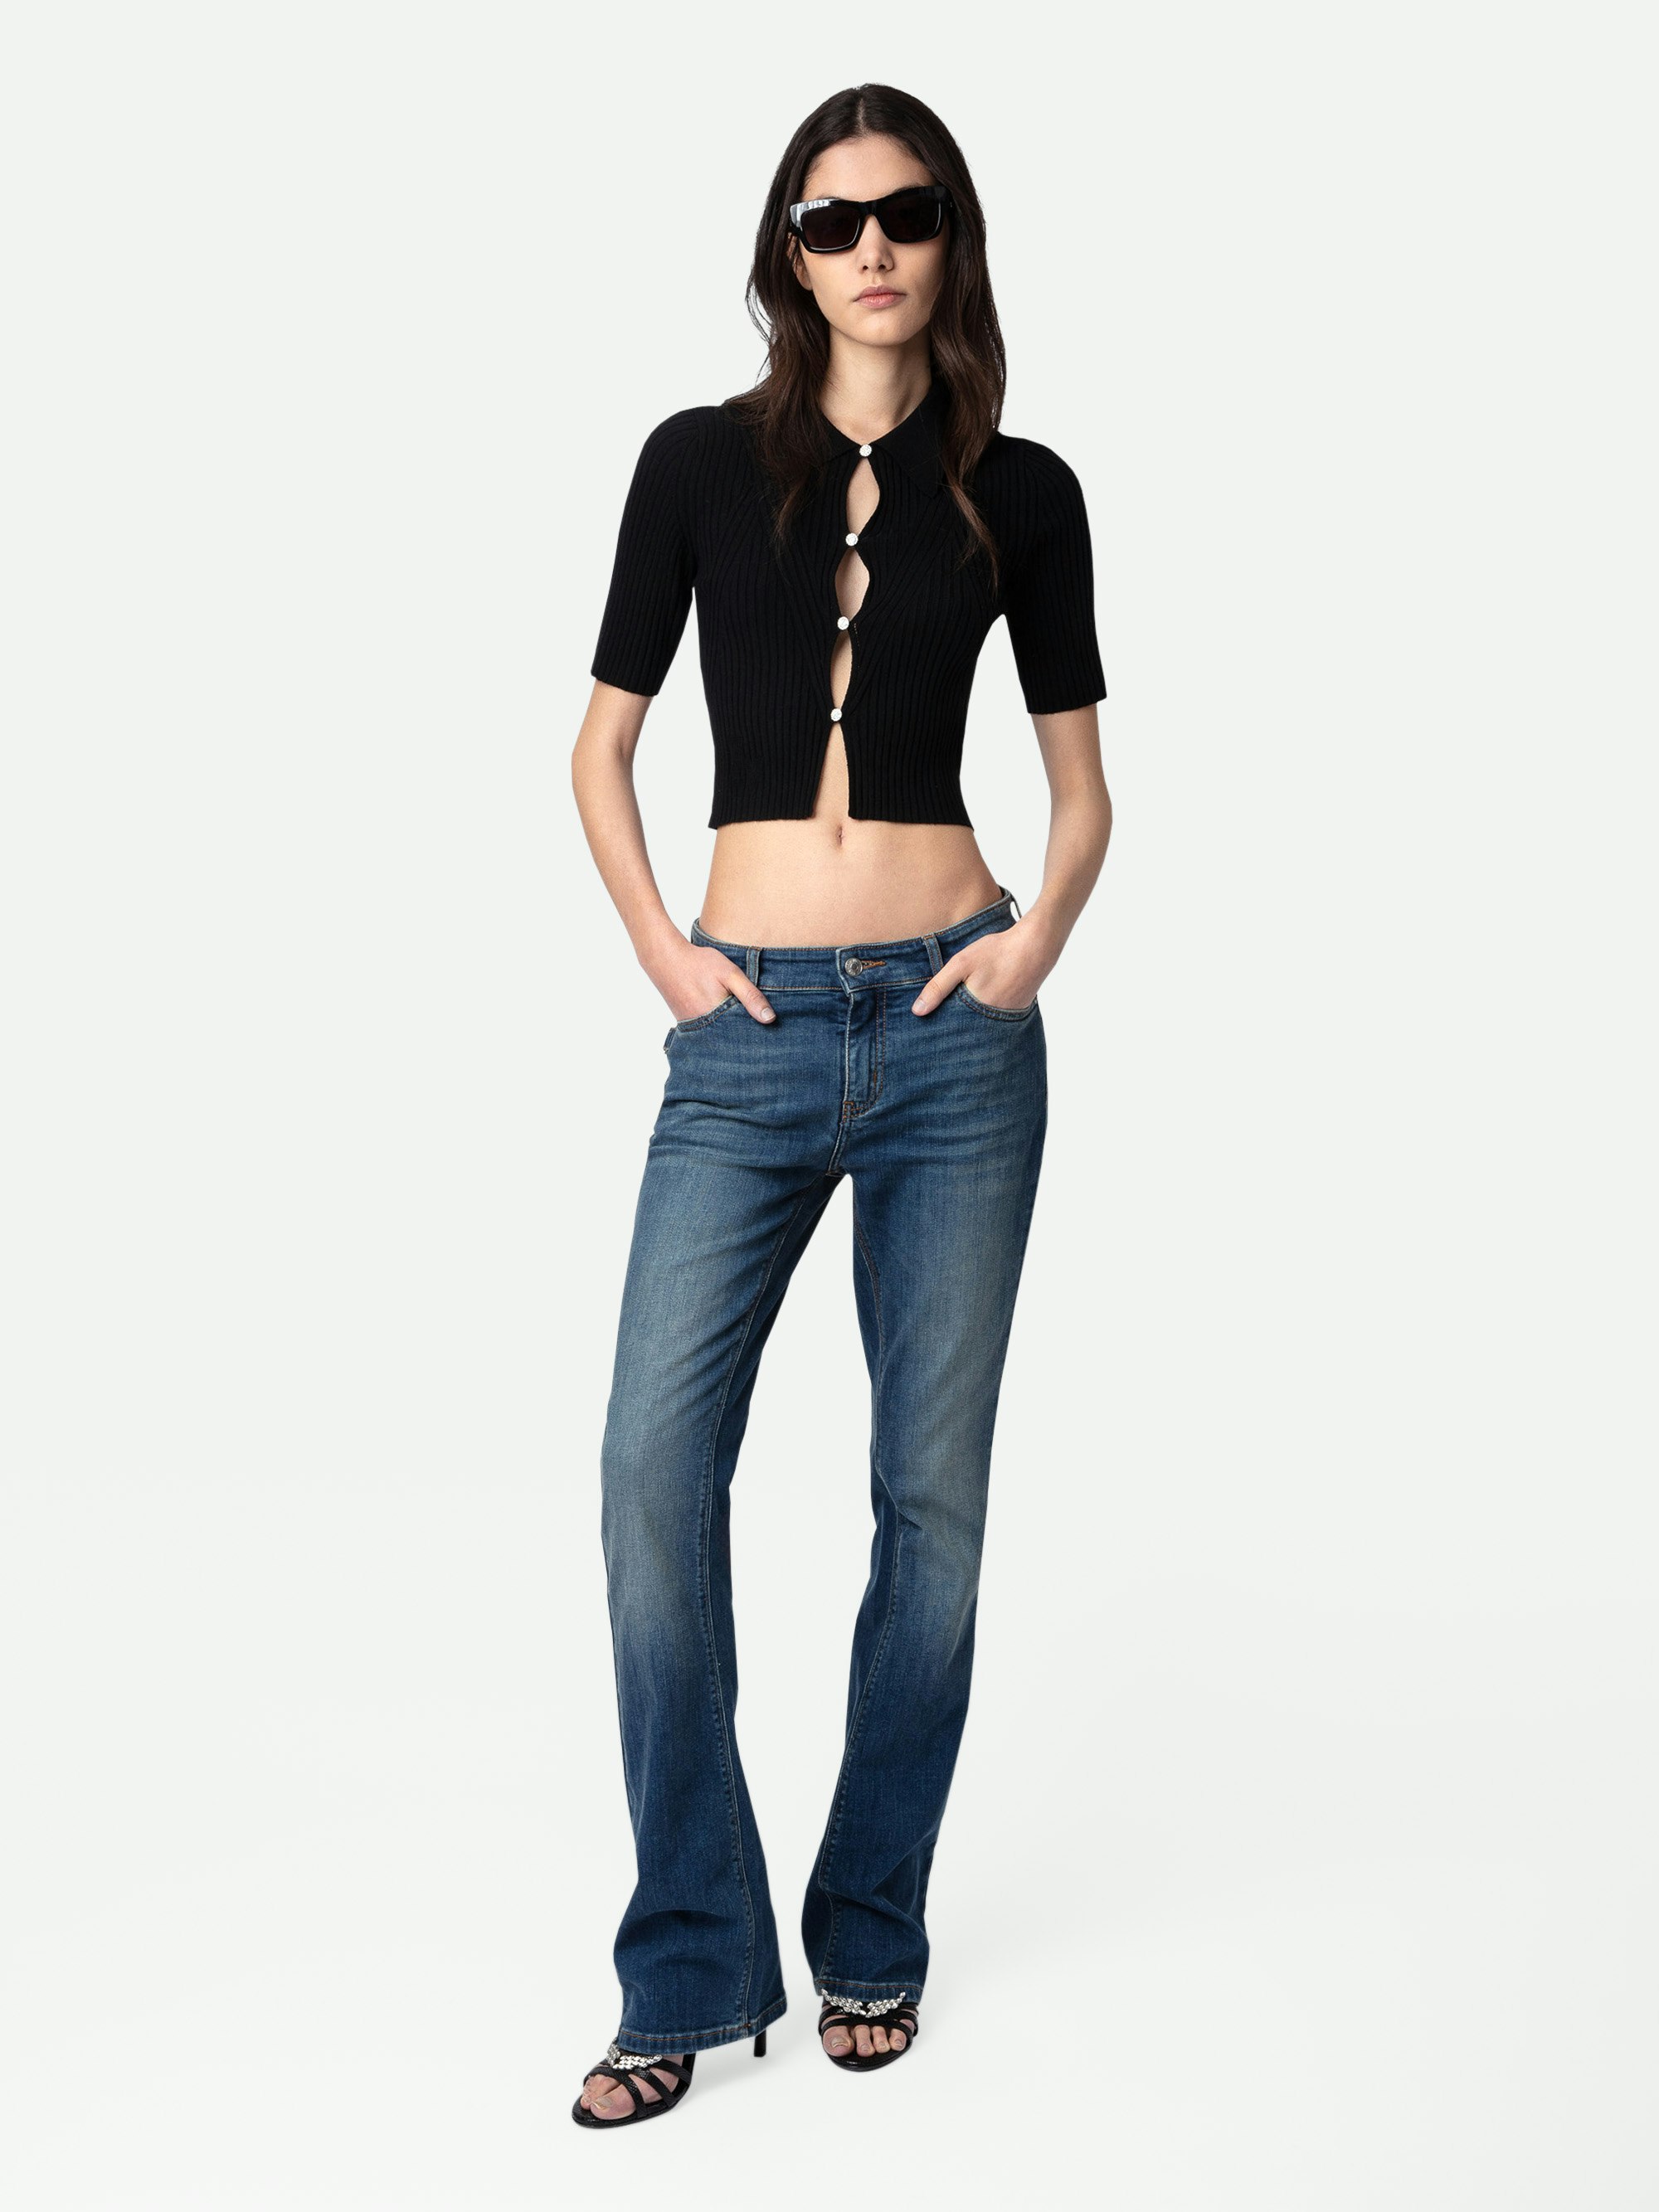 Lyam Top - Black merino wool cropped top with shirt collar, short sleeves, diamanté jewel buttons and wings on the back.